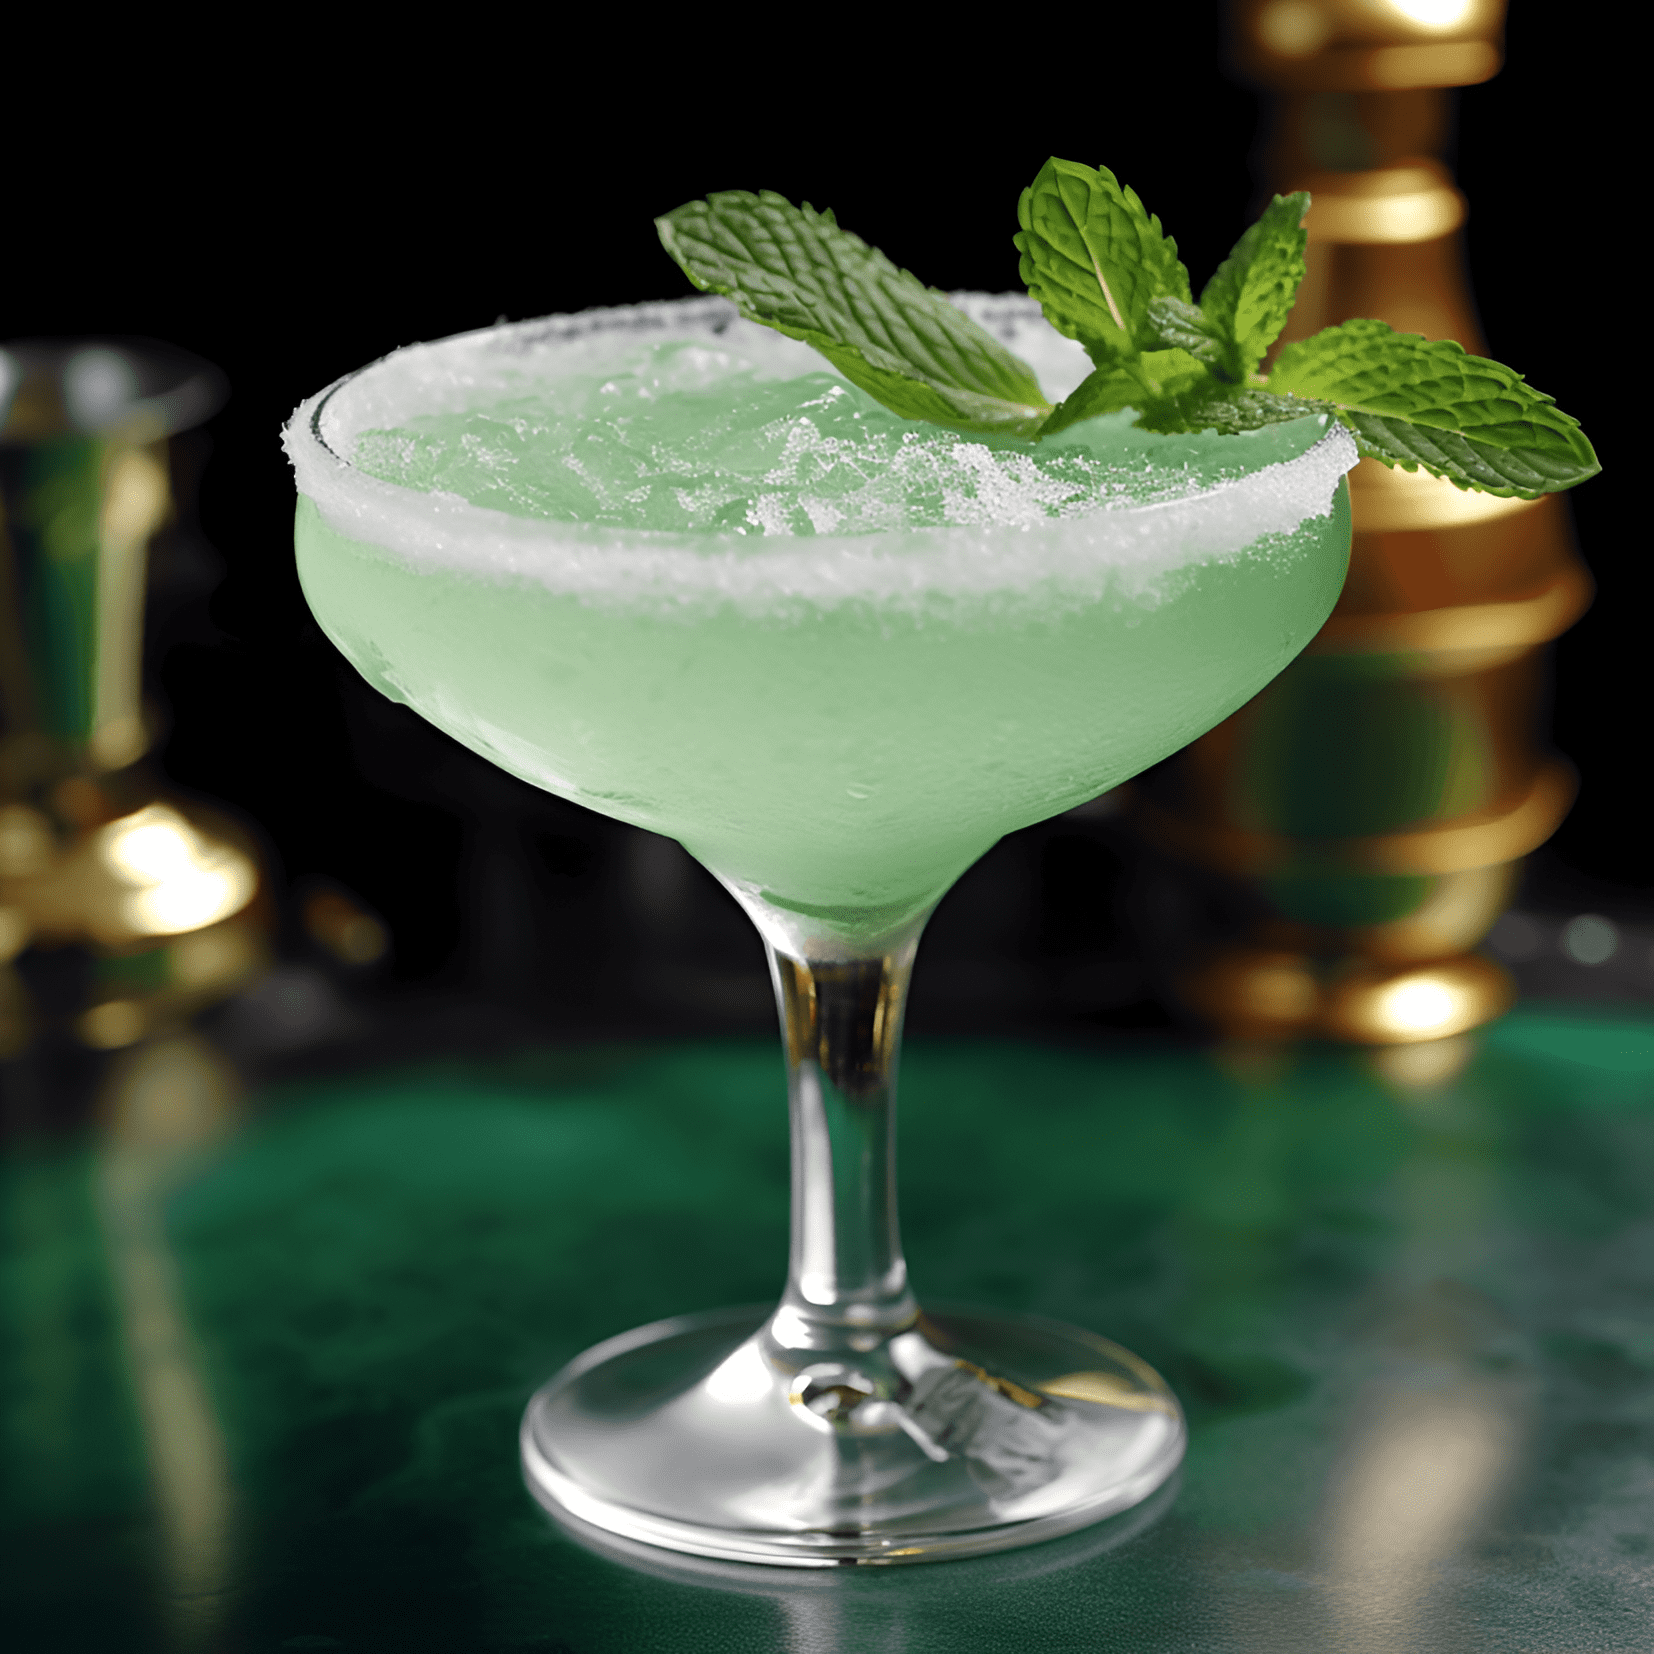 Wintergreen Cocktail Recipe - The Wintergreen cocktail offers a perfect balance of sweet and sour, with a refreshing minty flavor. It has a smooth, velvety texture and a warming sensation that lingers on the palate. The combination of ingredients creates a harmonious blend of flavors that is both invigorating and comforting.